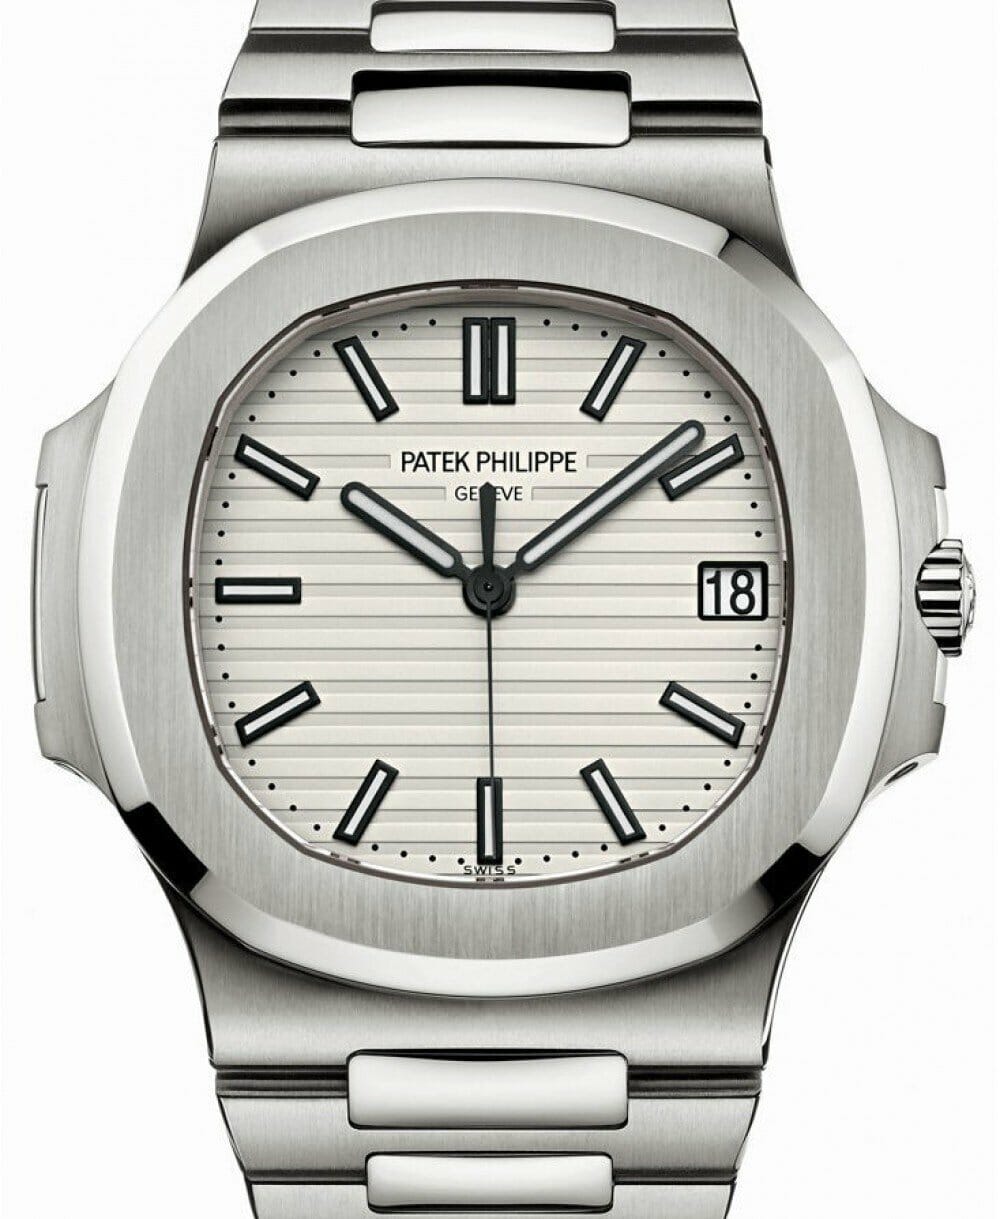 Patek Philippe - Nautilus - 5711/1A - Stainless Steel - White Dial - 40mm